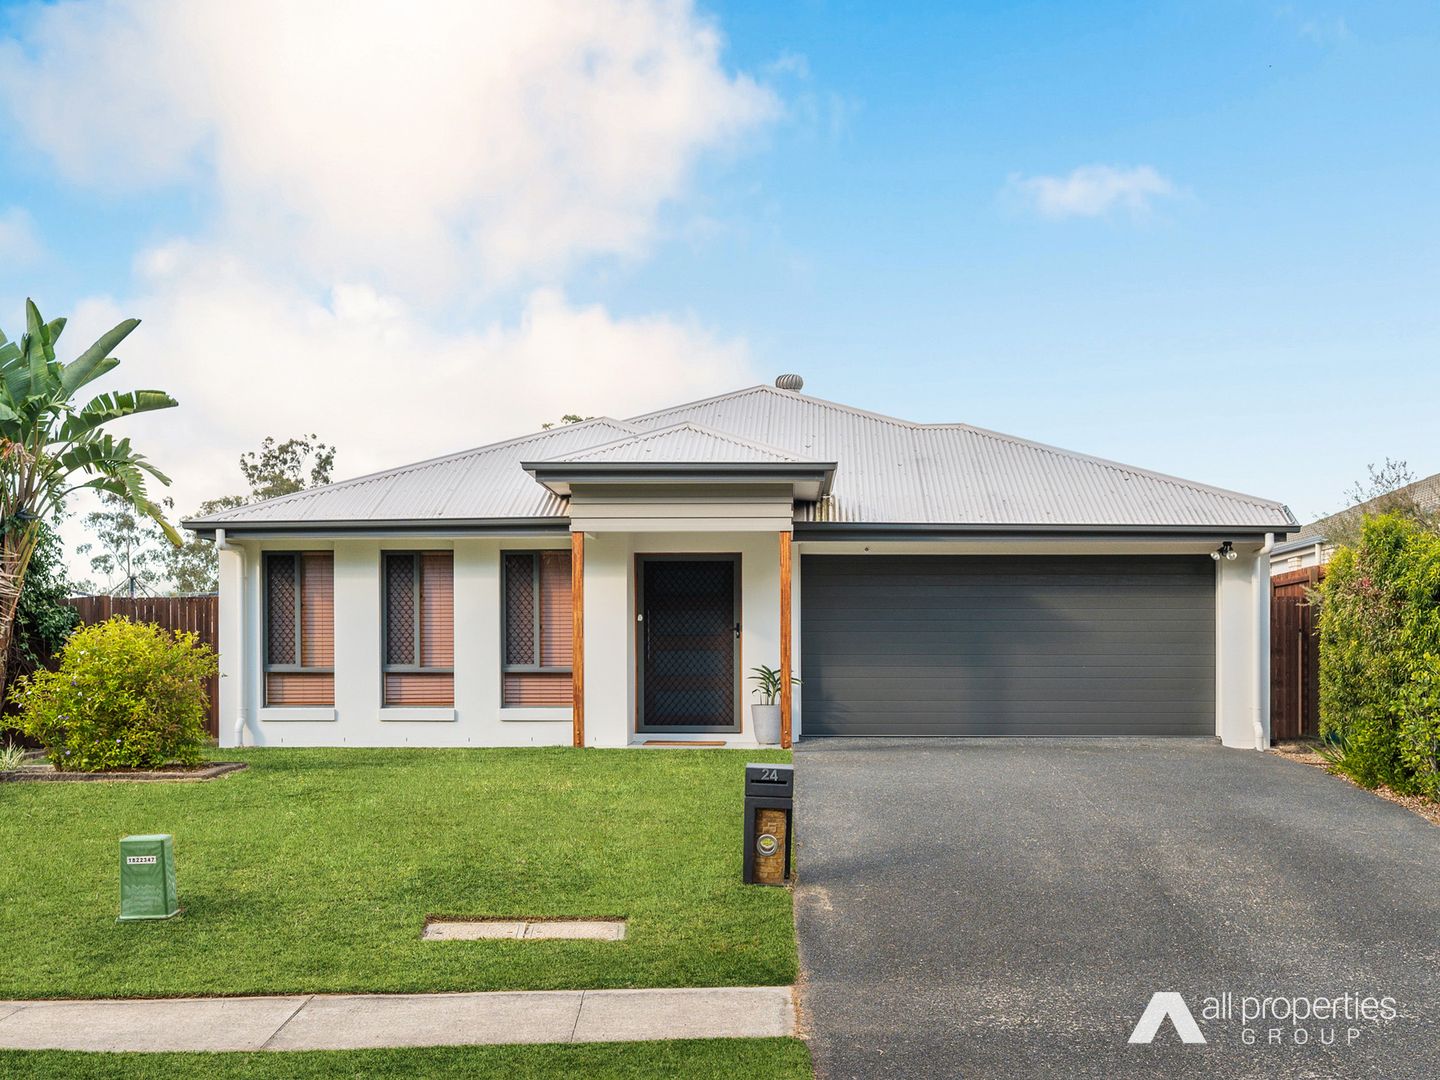 24 Bathersby Crescent, Augustine Heights QLD 4300